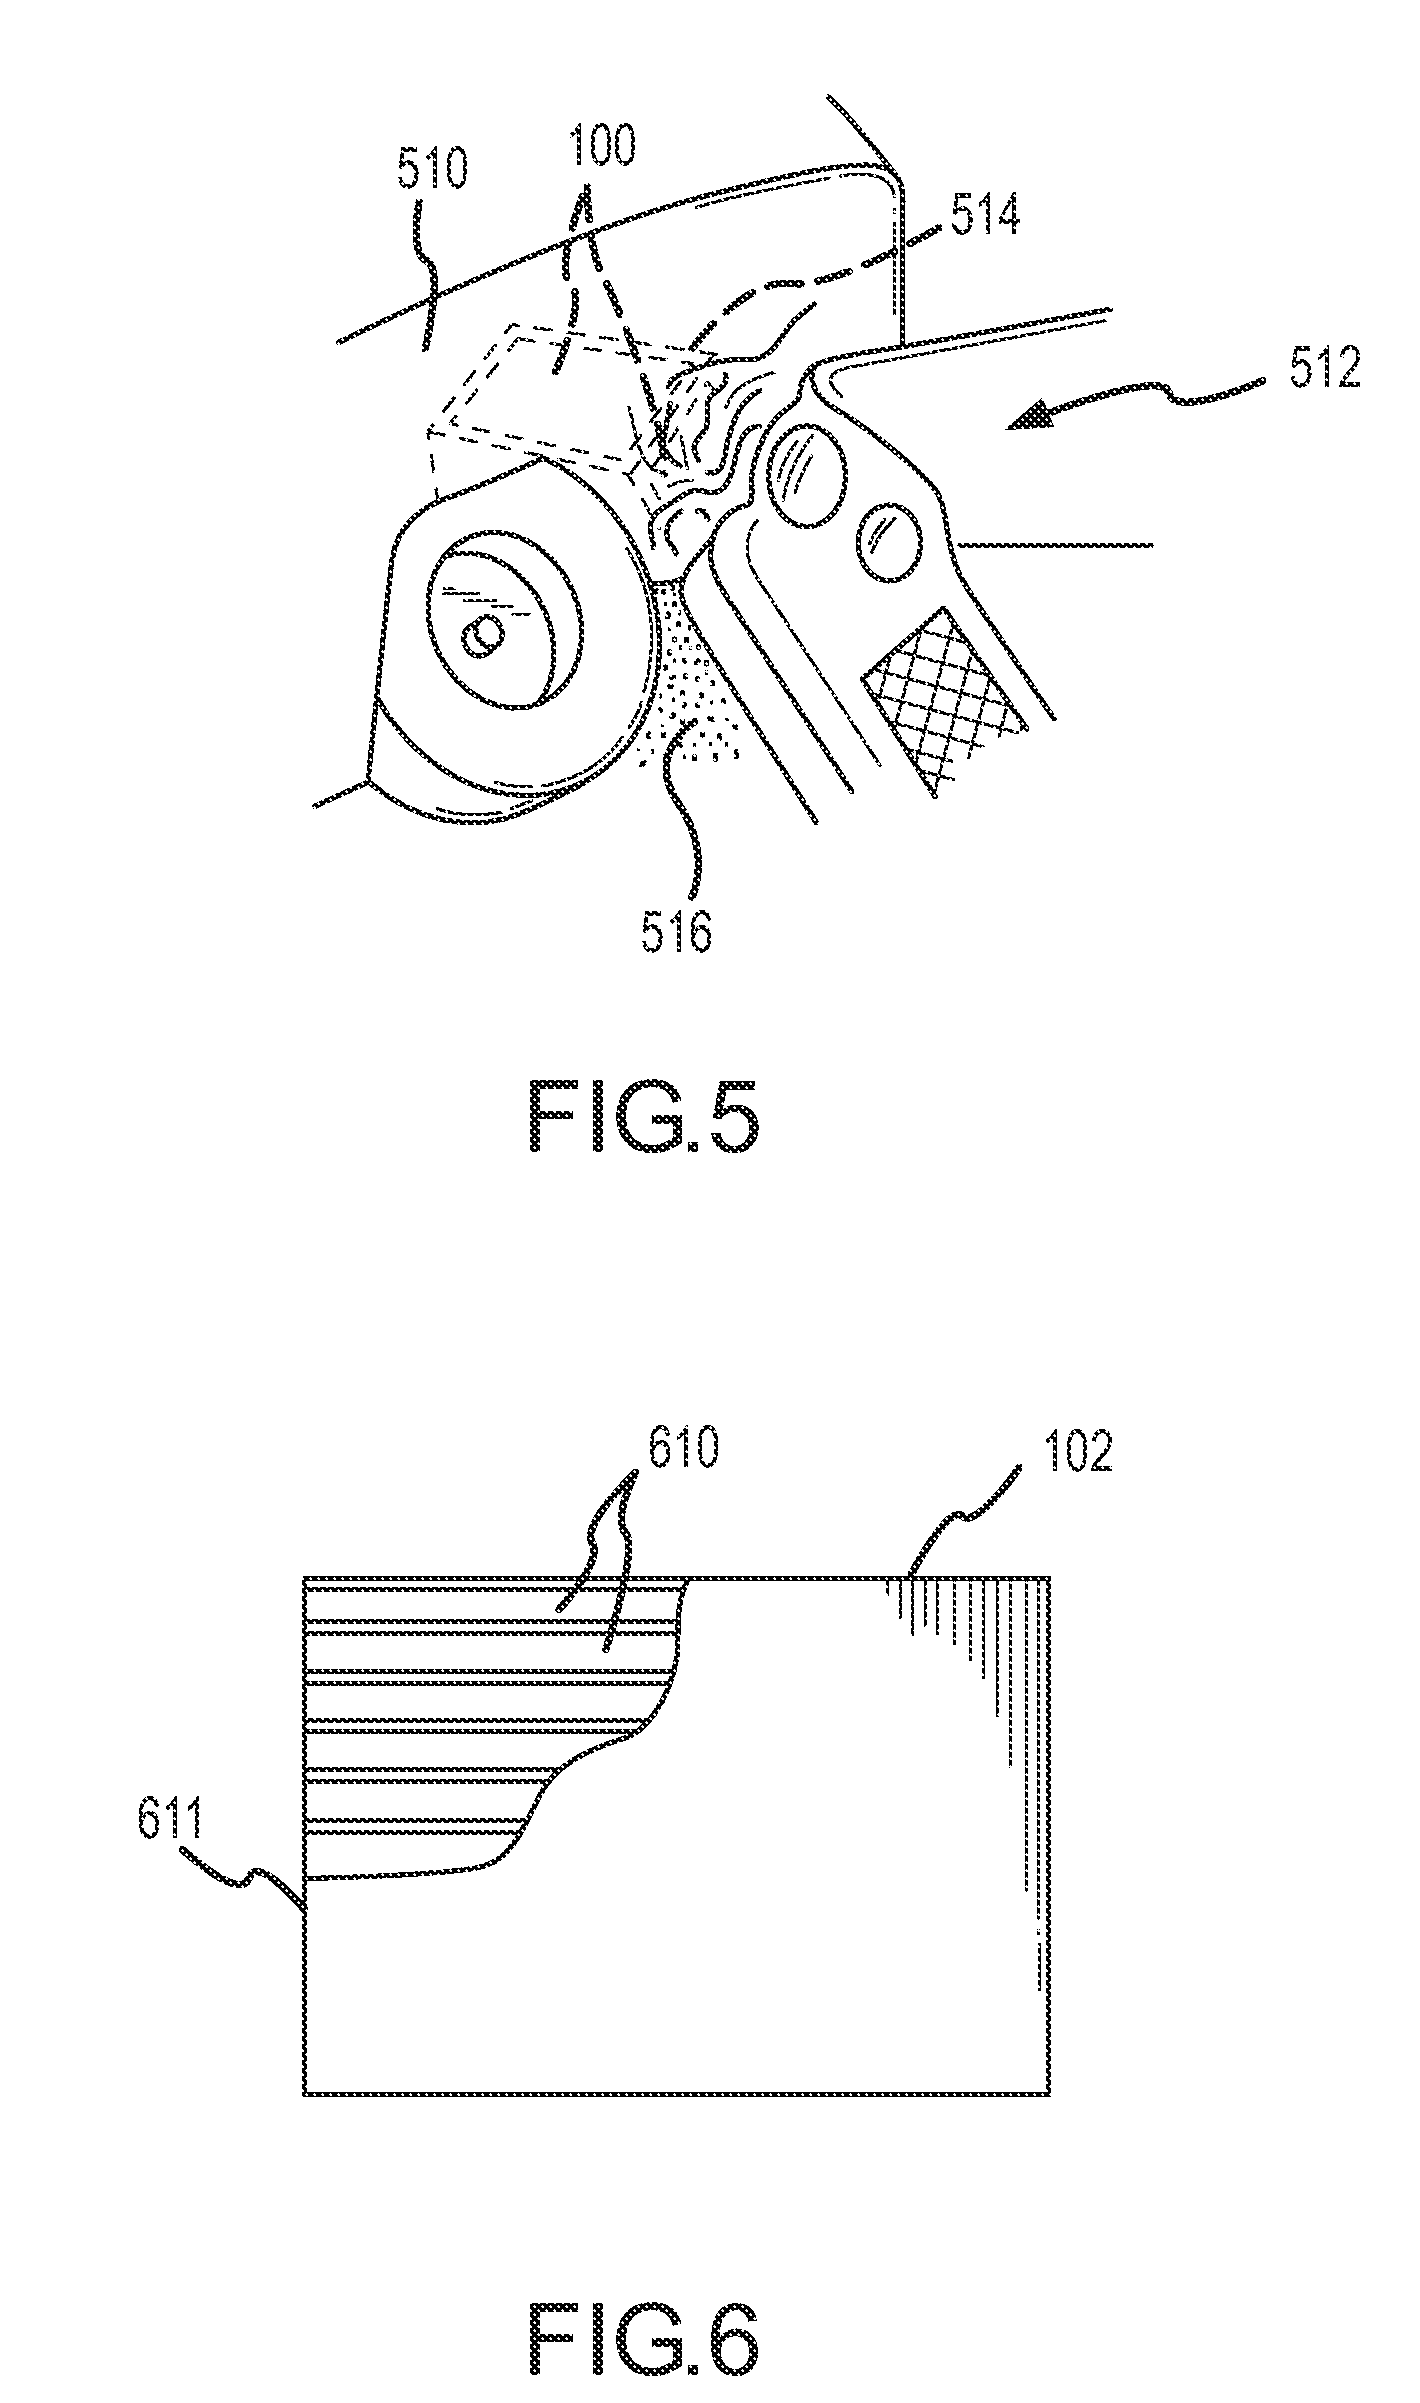 Methods and apparatus for controlling hazardous and/or flammable materials